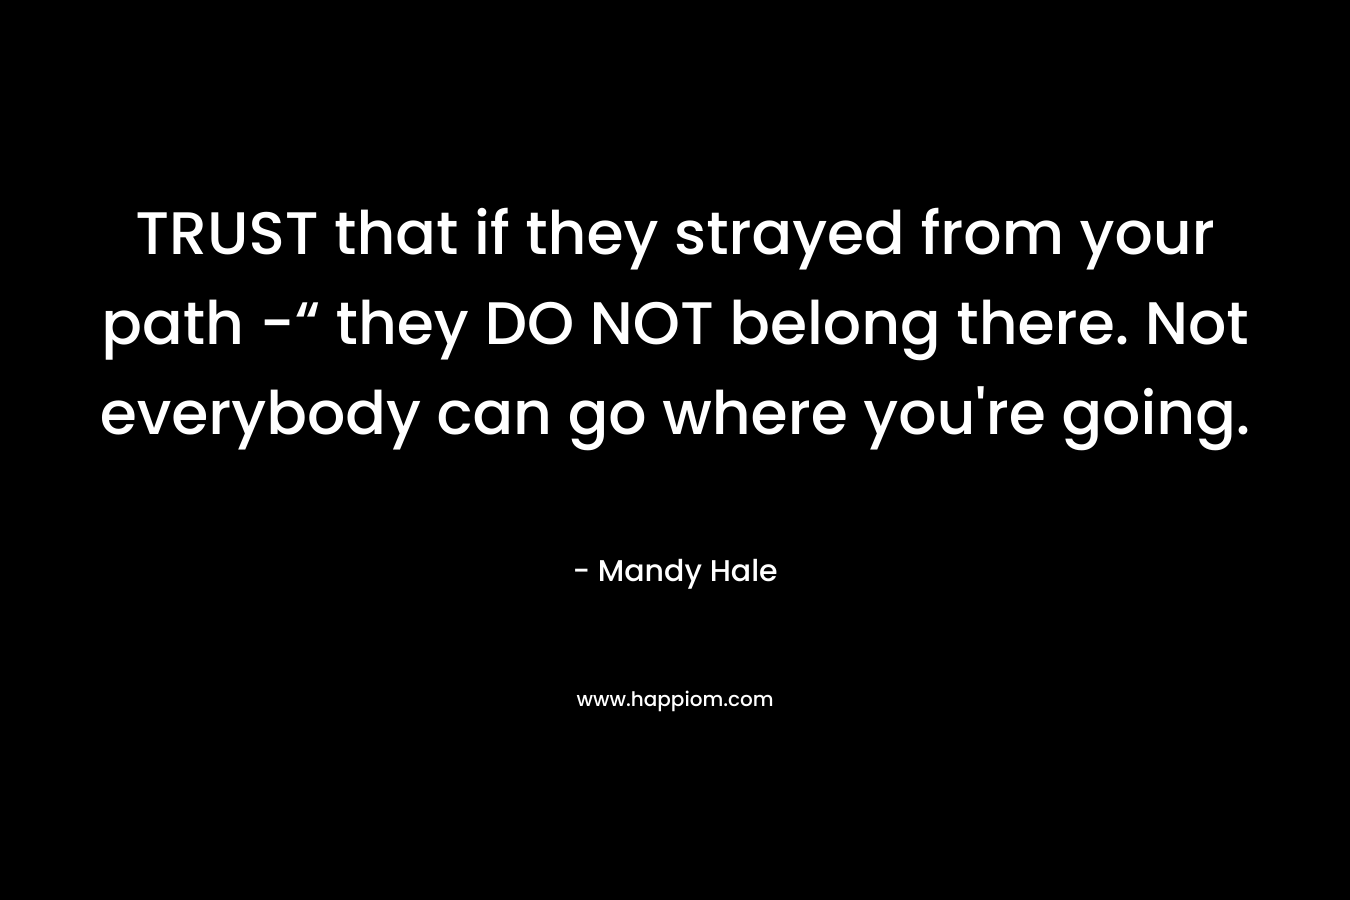 TRUST that if they strayed from your path -“ they DO NOT belong there. Not everybody can go where you're going.